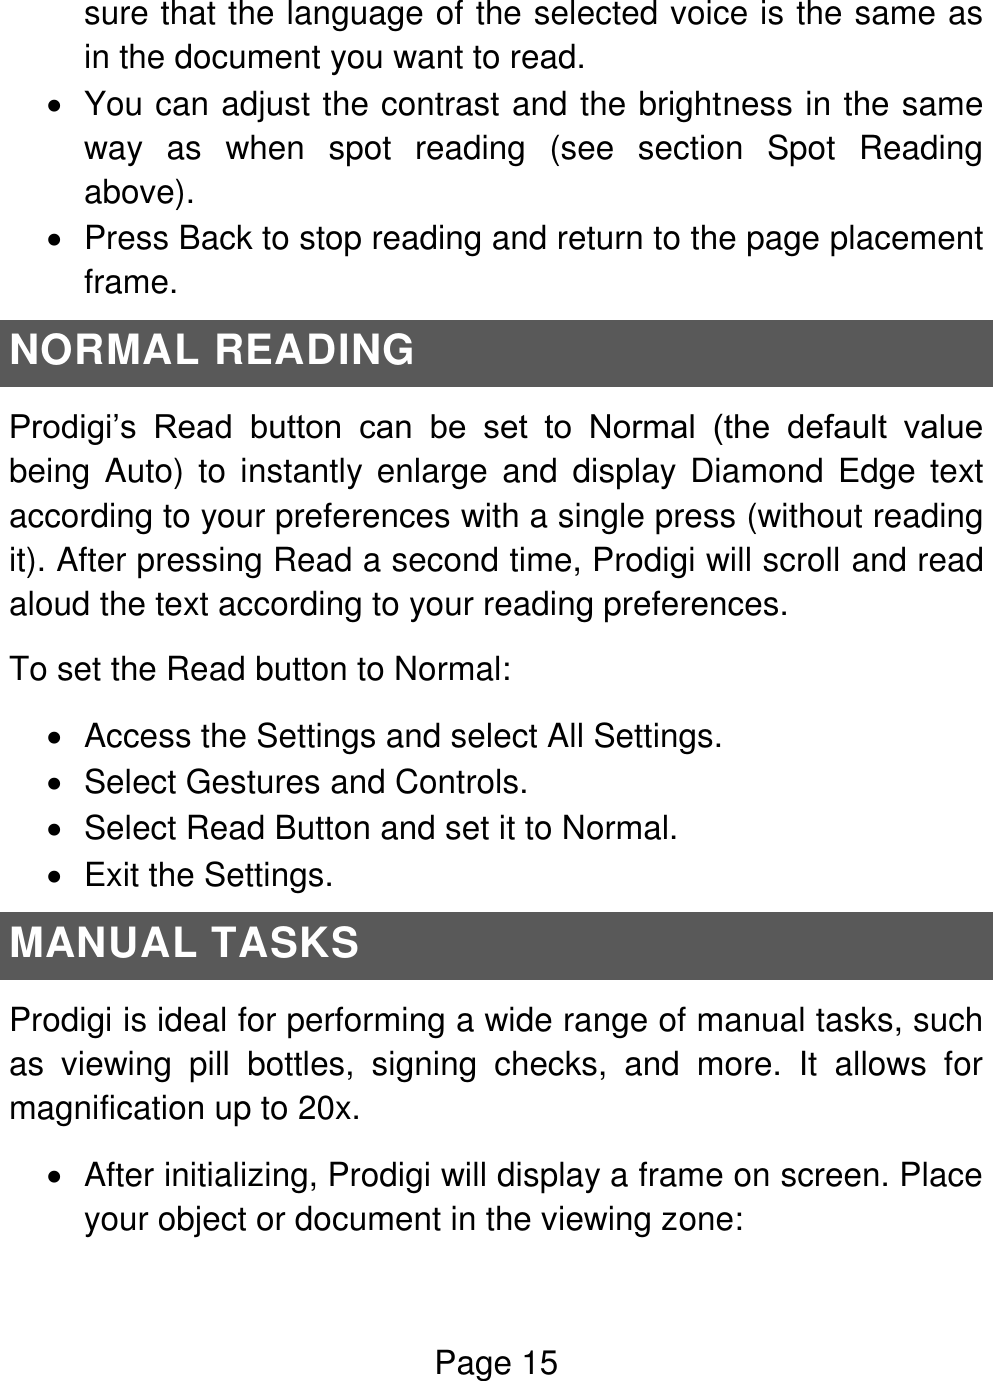 Page 15  sure that the language of the selected voice is the same as in the document you want to read.   You can adjust the contrast and the brightness in the same way  as  when  spot  reading  (see  section  Spot  Reading above).   Press Back to stop reading and return to the page placement frame. NORMAL READING Prodigi’s  Read  button  can  be  set  to  Normal  (the  default  value being Auto) to instantly enlarge  and  display Diamond  Edge text according to your preferences with a single press (without reading it). After pressing Read a second time, Prodigi will scroll and read aloud the text according to your reading preferences. To set the Read button to Normal:    Access the Settings and select All Settings.    Select Gestures and Controls.    Select Read Button and set it to Normal.    Exit the Settings. MANUAL TASKS Prodigi is ideal for performing a wide range of manual tasks, such as  viewing  pill  bottles,  signing  checks,  and  more.  It  allows  for magnification up to 20x.   After initializing, Prodigi will display a frame on screen. Place your object or document in the viewing zone: 